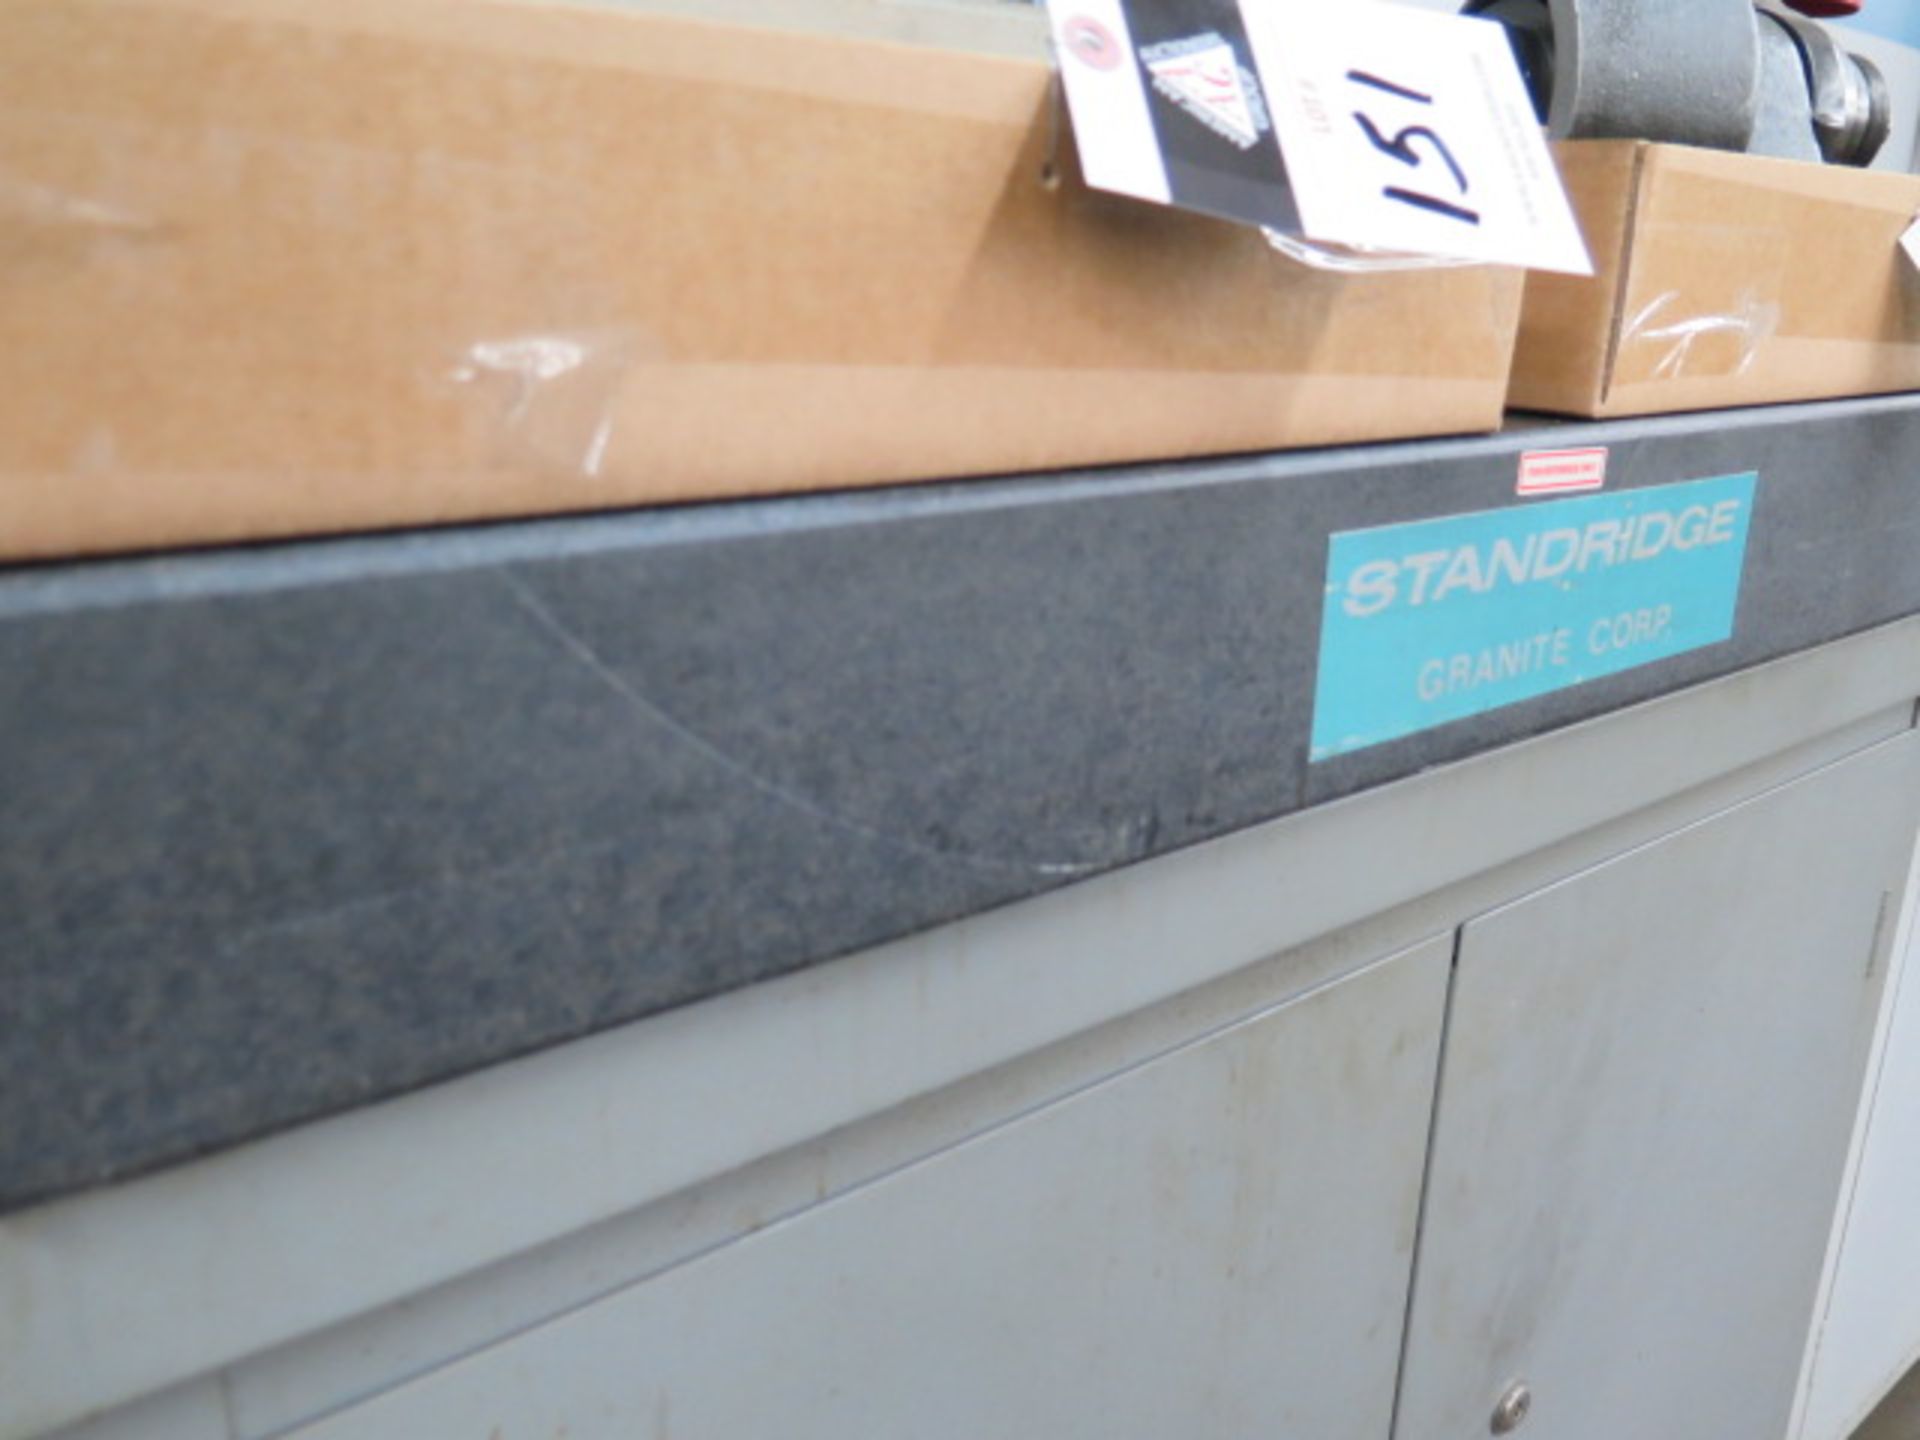 Standridge 24" x 36" x 4" Granite Surface Plate w/ Cabinet Base (SOLD AS-IS - NO WARRANTY) - Image 2 of 7